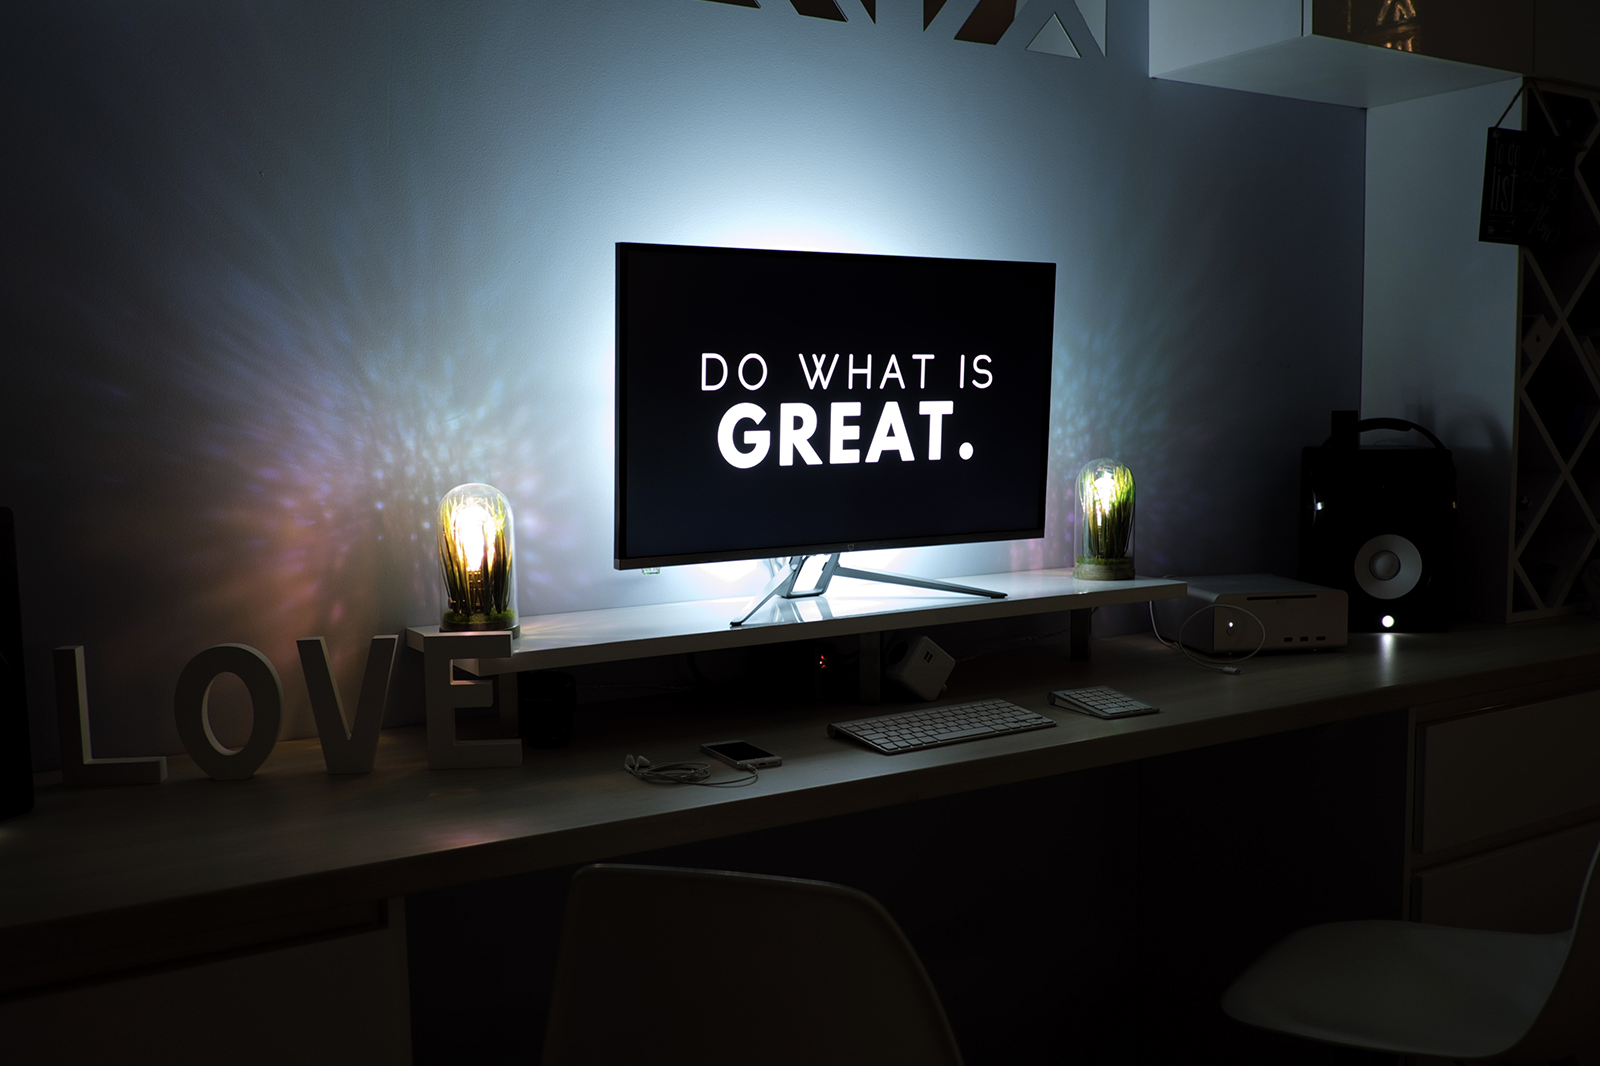 Computer screen on a table with a sign that reads "DO WHAT IS GREAT".